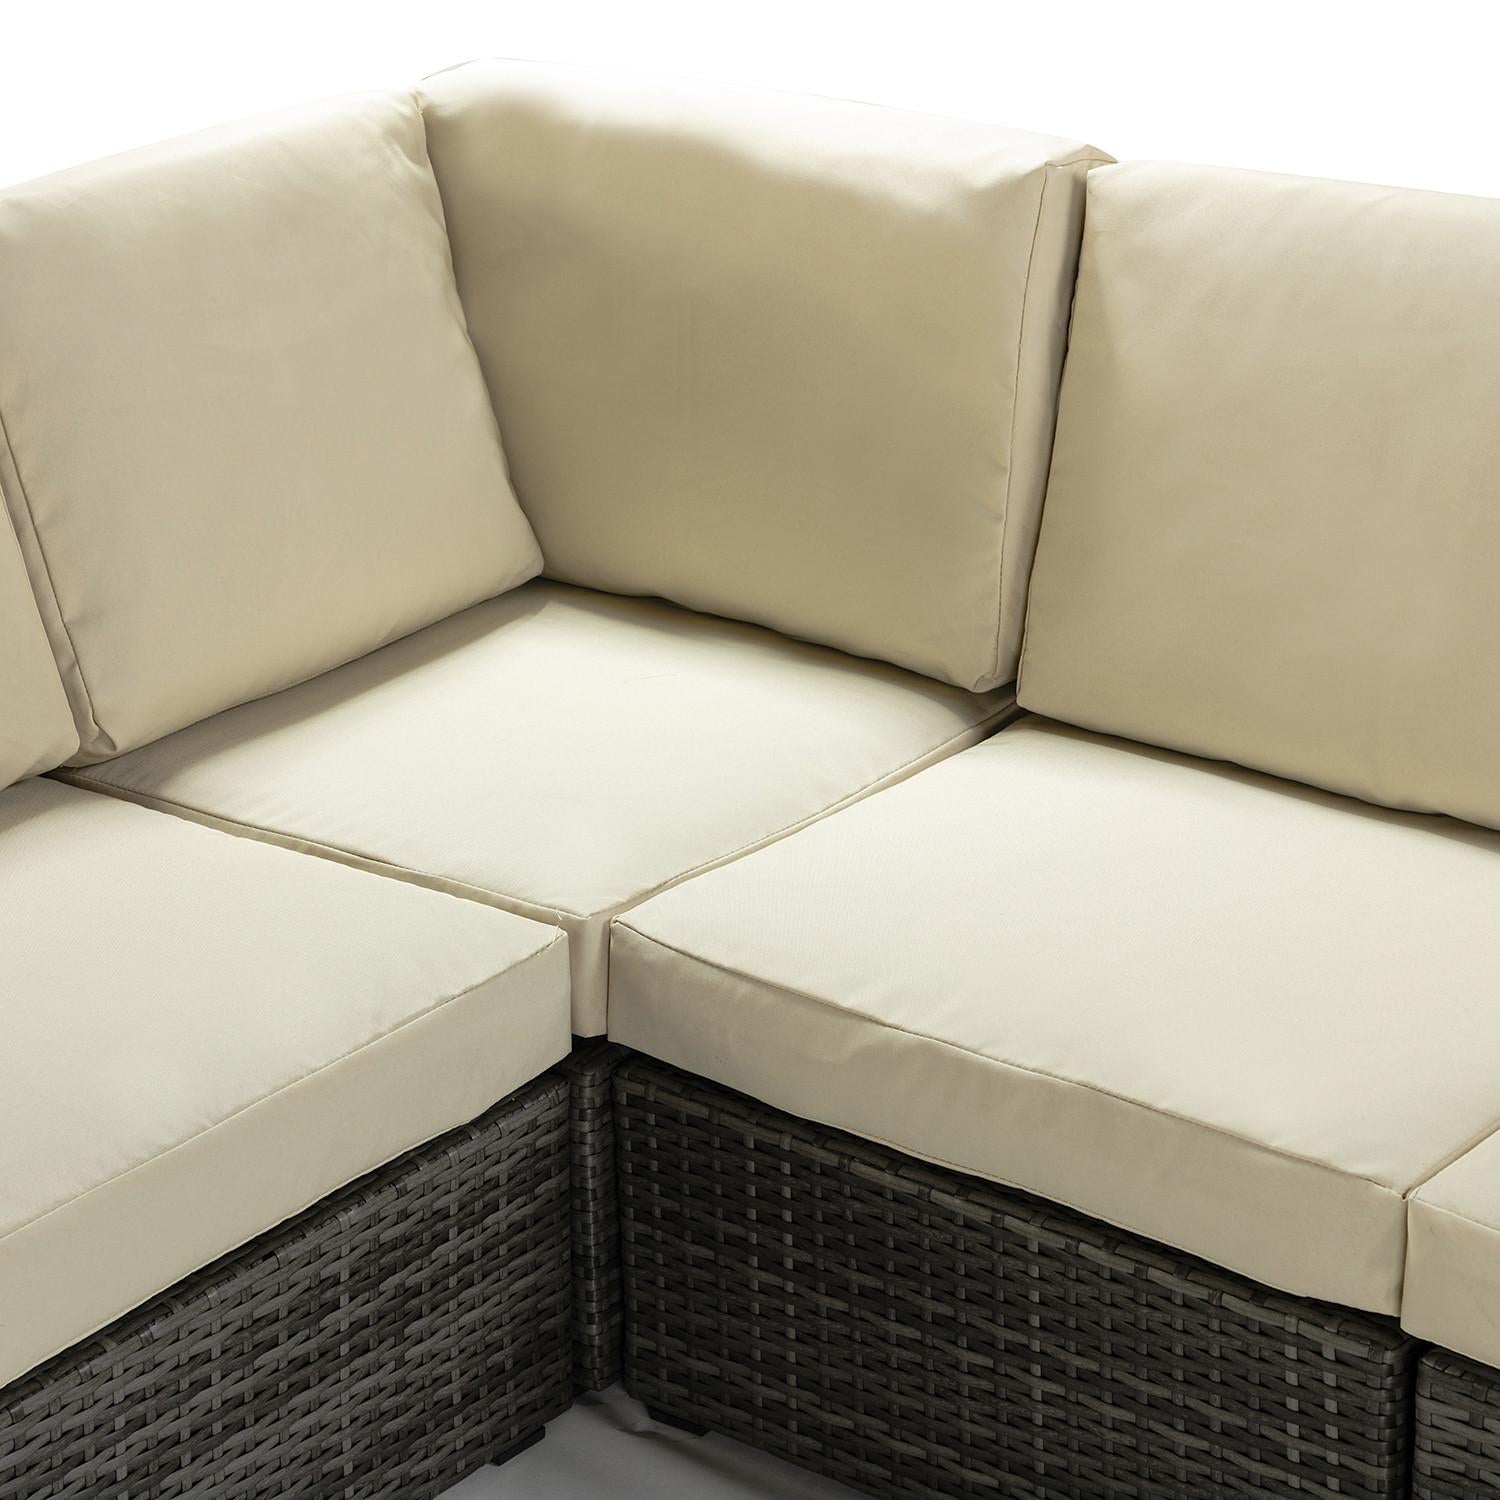 Brown Faux Rattan and Ivory Outdoor Sectional Sofa and Table Set